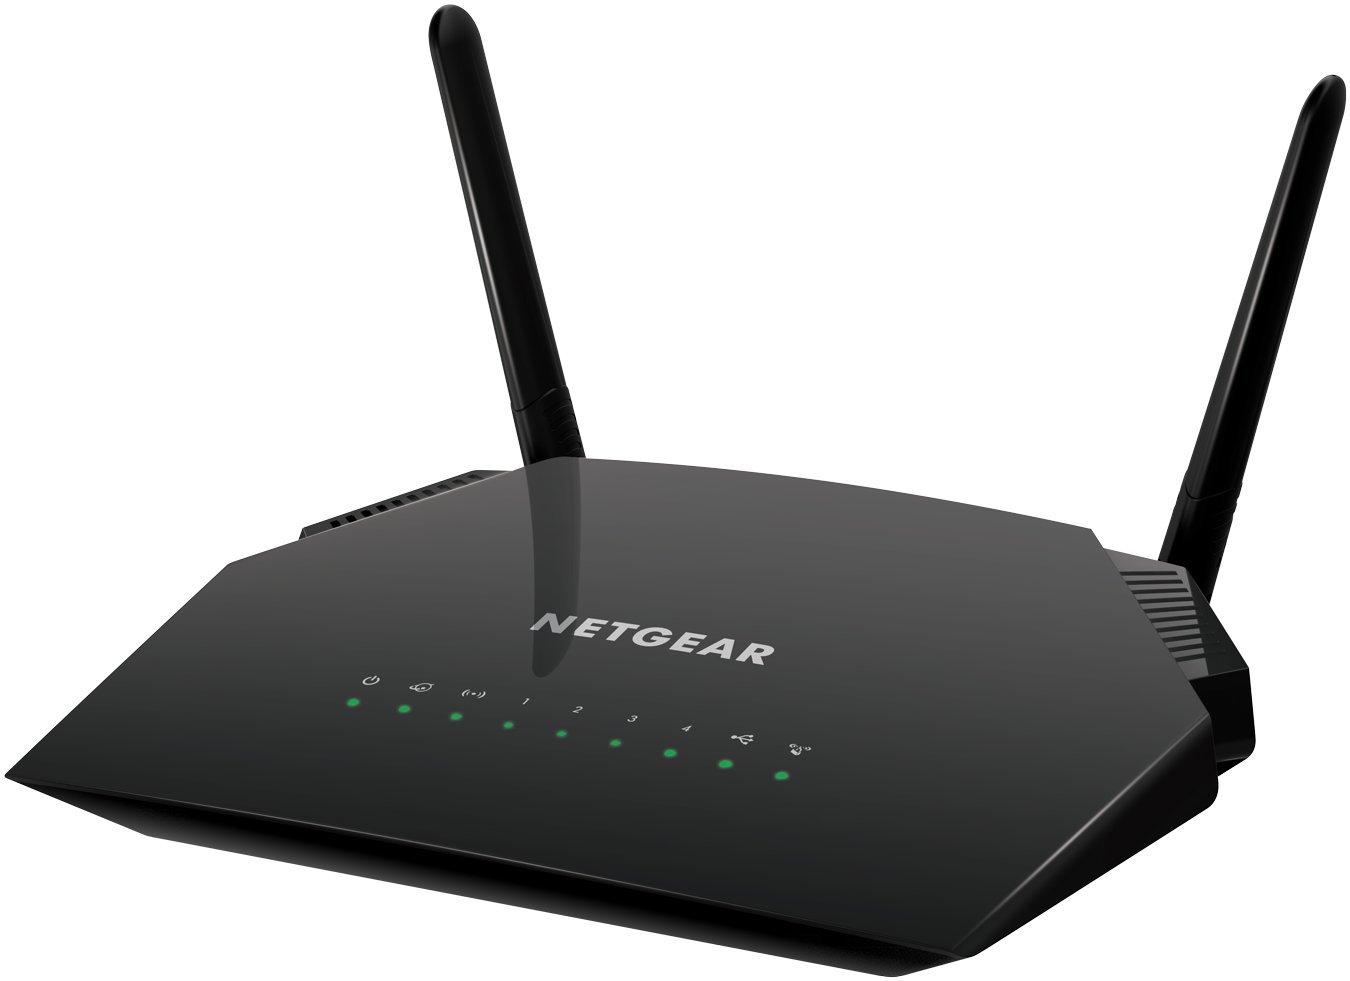 Common Solutions And The Issues While Accessing The Netgear Nighthawk Login